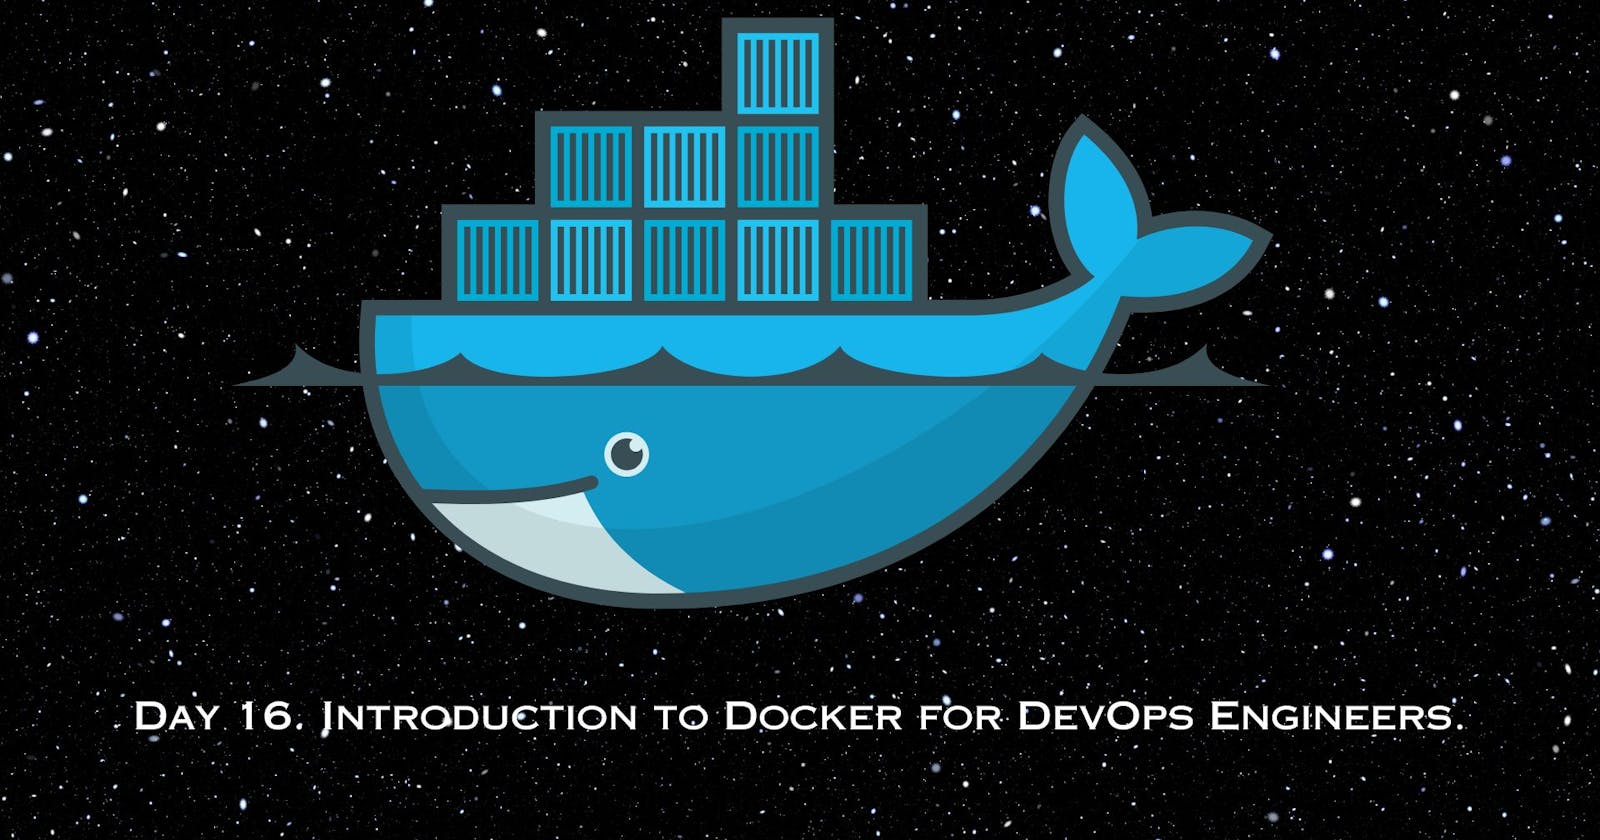 Day 16. Introduction to Docker for DevOps Engineers.